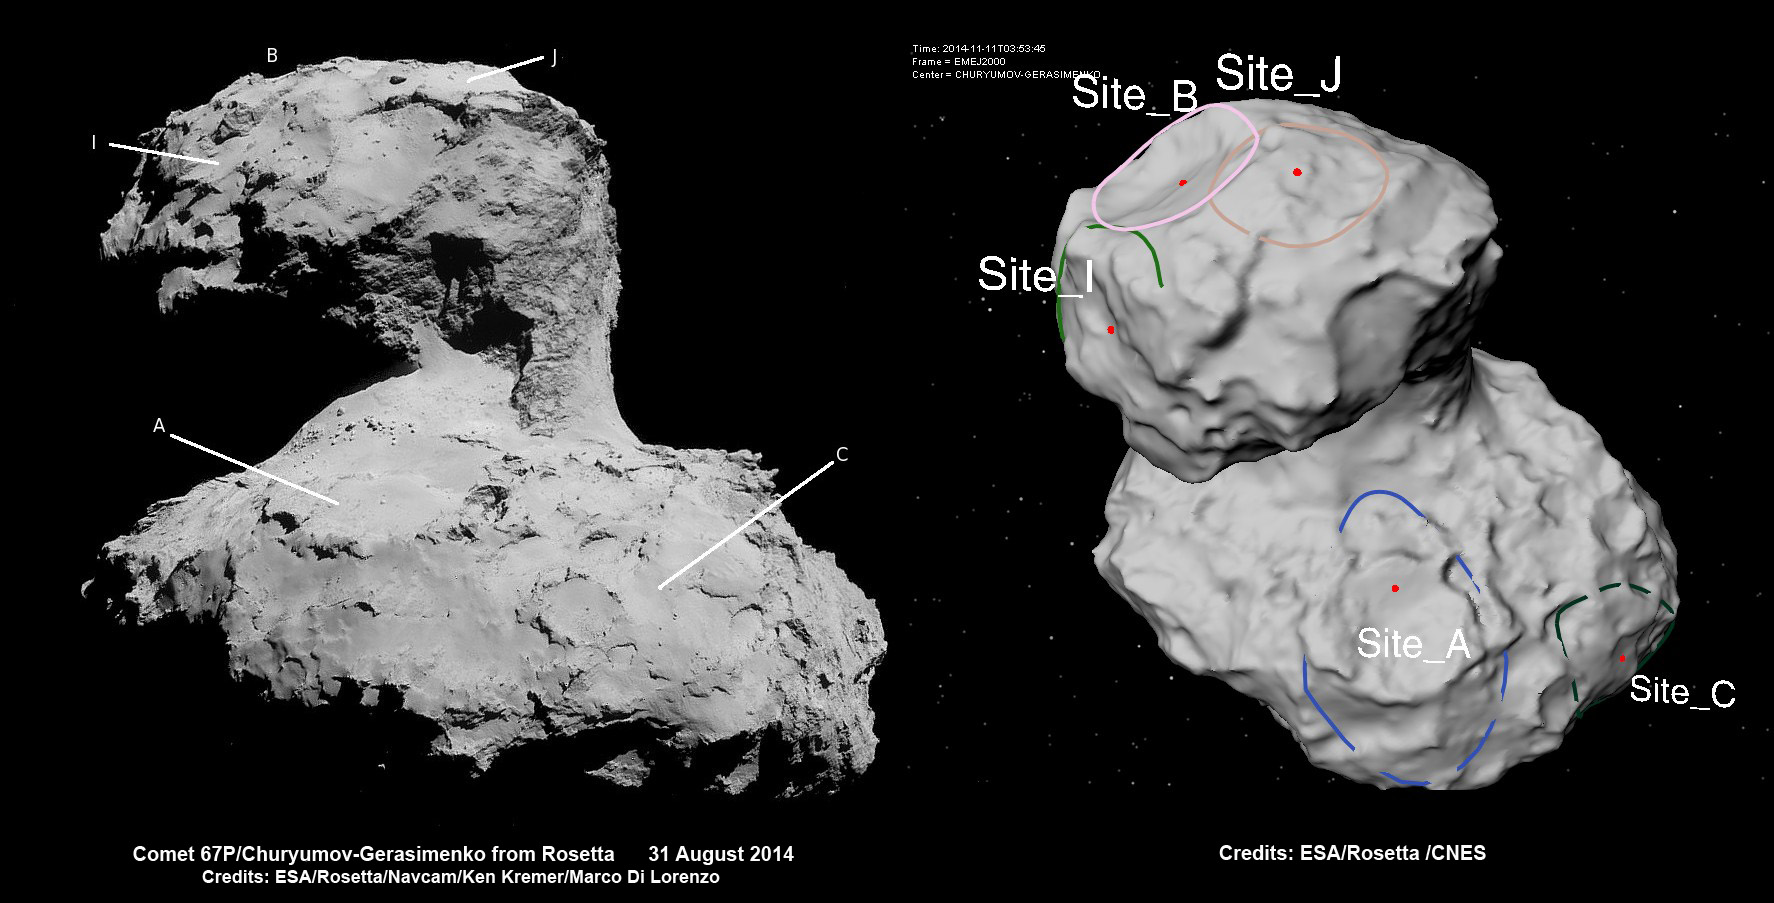 Locations of the primary landing site ‘J’ and backup landing site ‘C’ for Rosetta’s Philae lander are shown in this side-by-side comparison of a four image navcam image photo (left) taken on Aug. 31, 2014 and a shape model generated by CNES and the Rosetta team.      Credit (left): ESA/Rosetta/NAVCAM/ Ken Kremer – kenkremer.com/Marco Di Lorenzo. Credit (right): ESA/Rosetta/CNES 